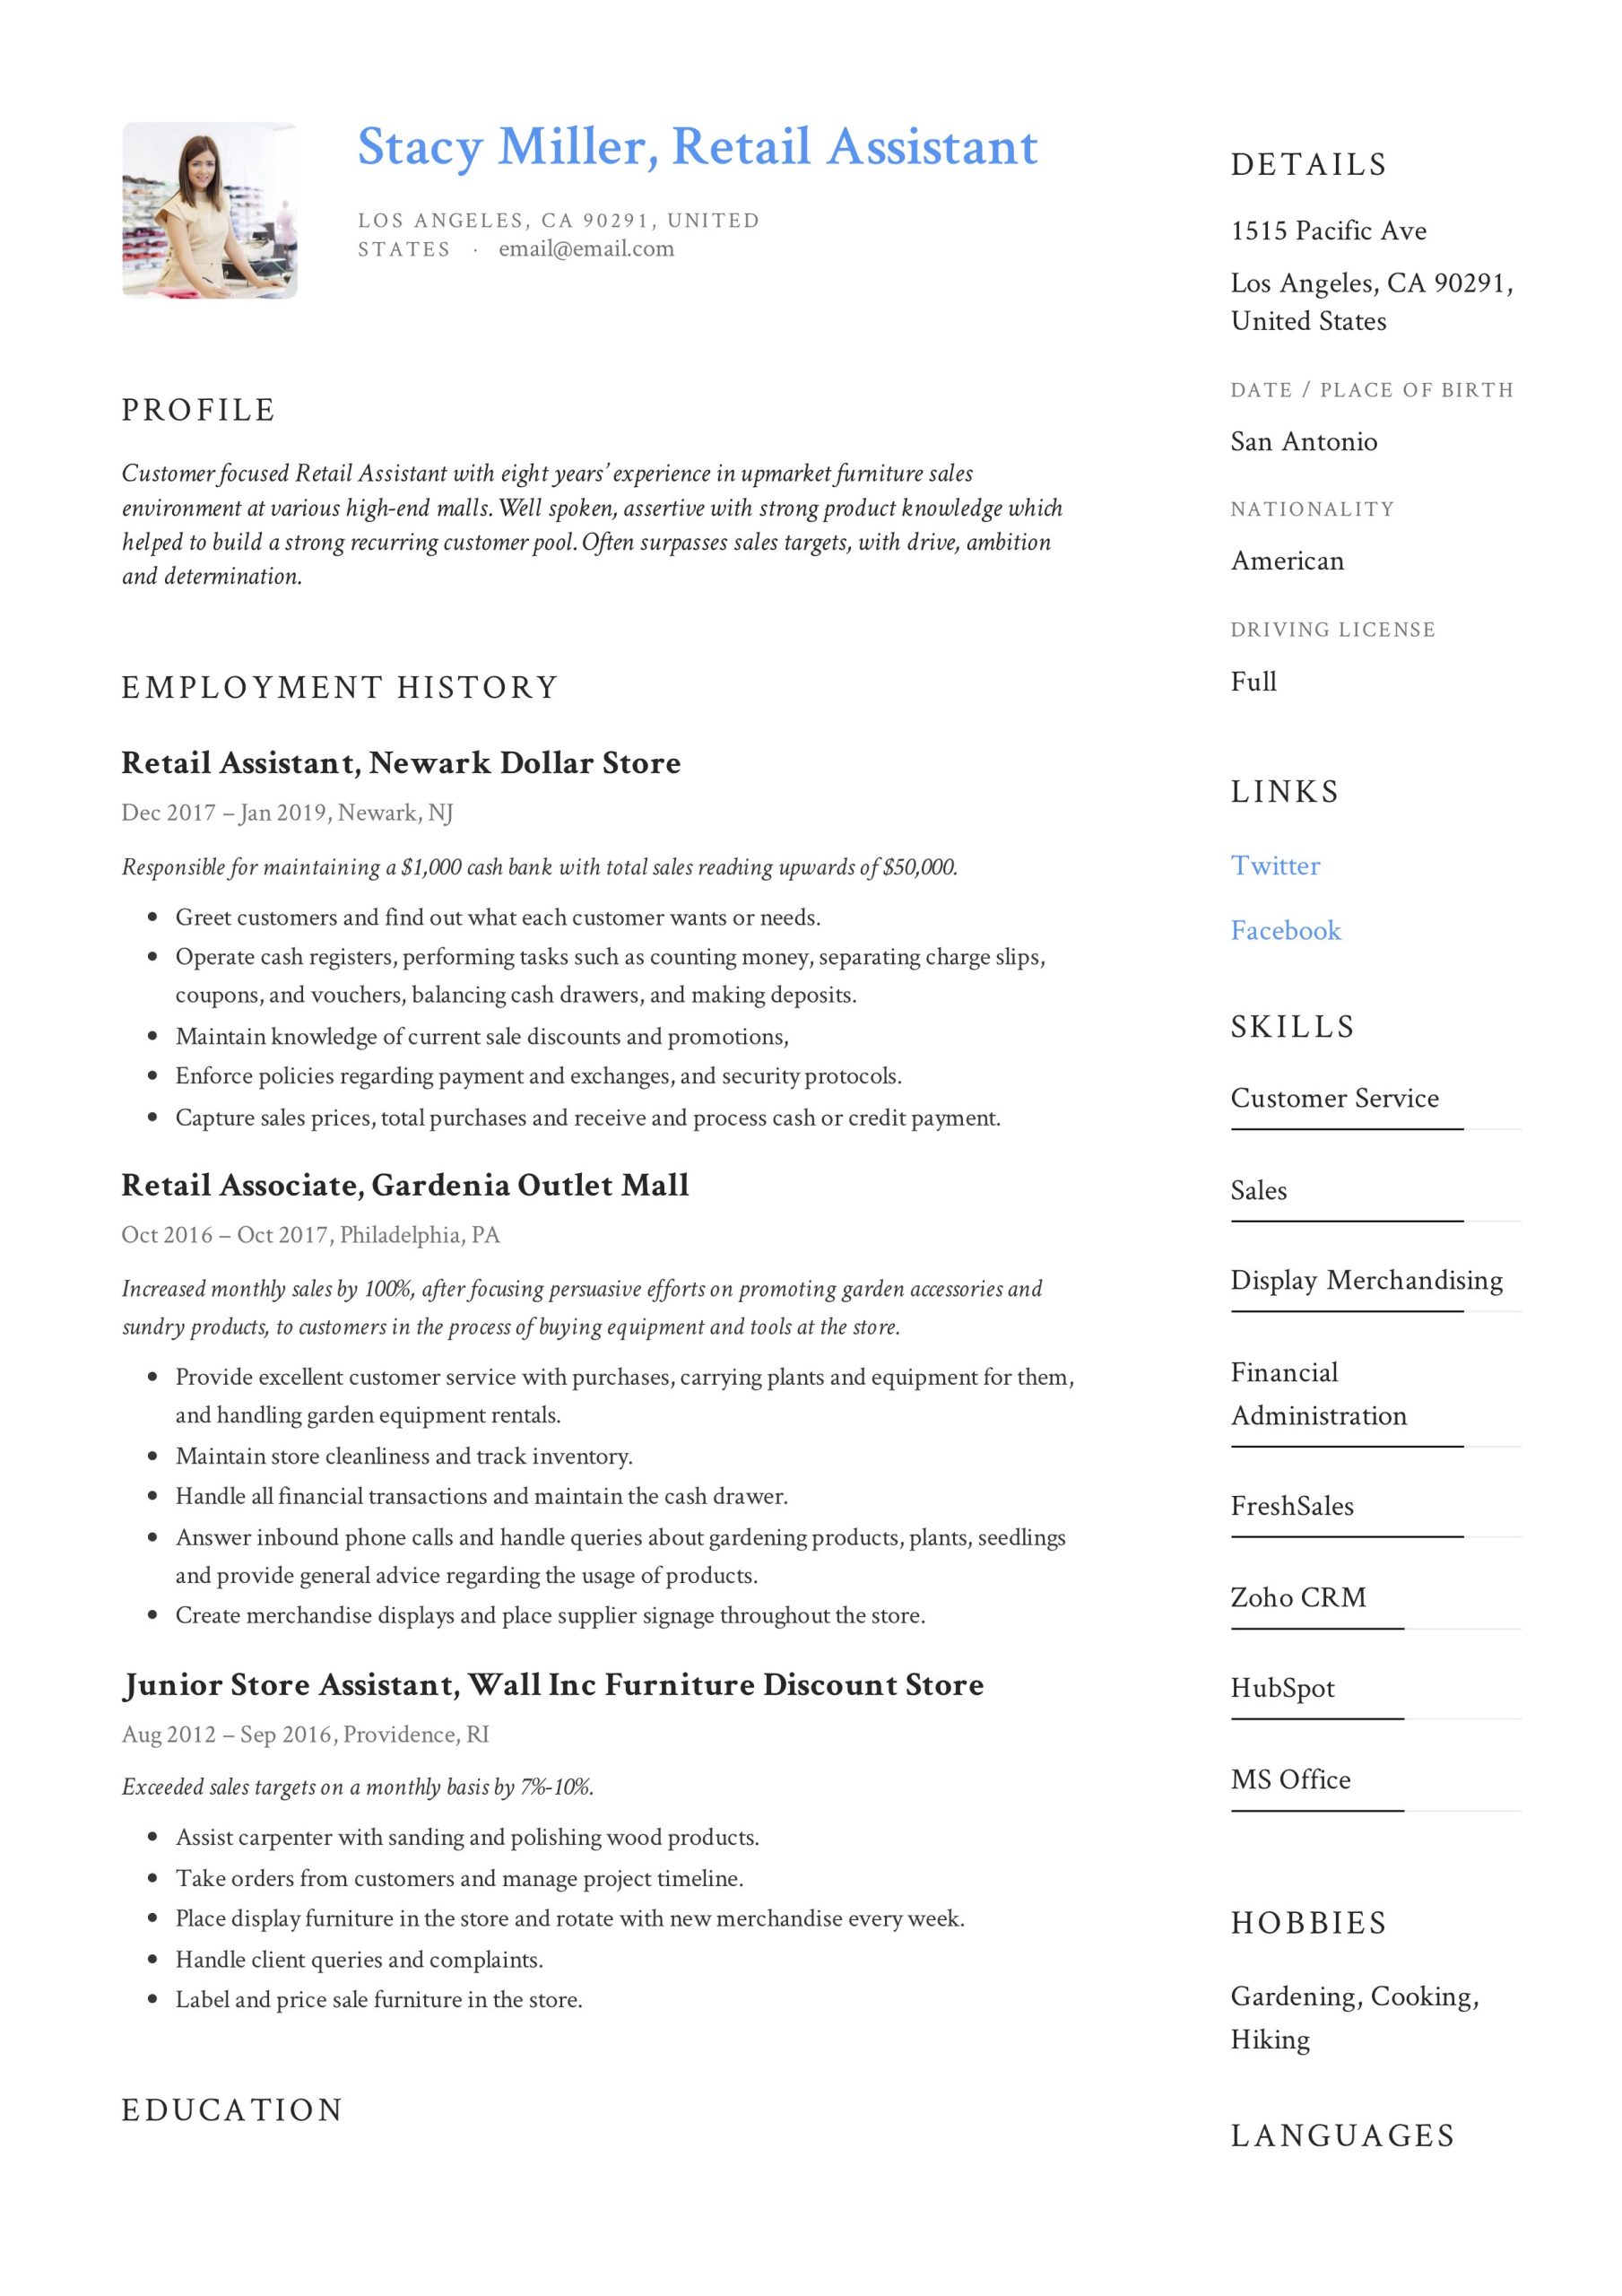 Sample Resume Sales assistant No Experience 12 Retail assistant Resume Samples & Writing Guide – Resumeviking.com